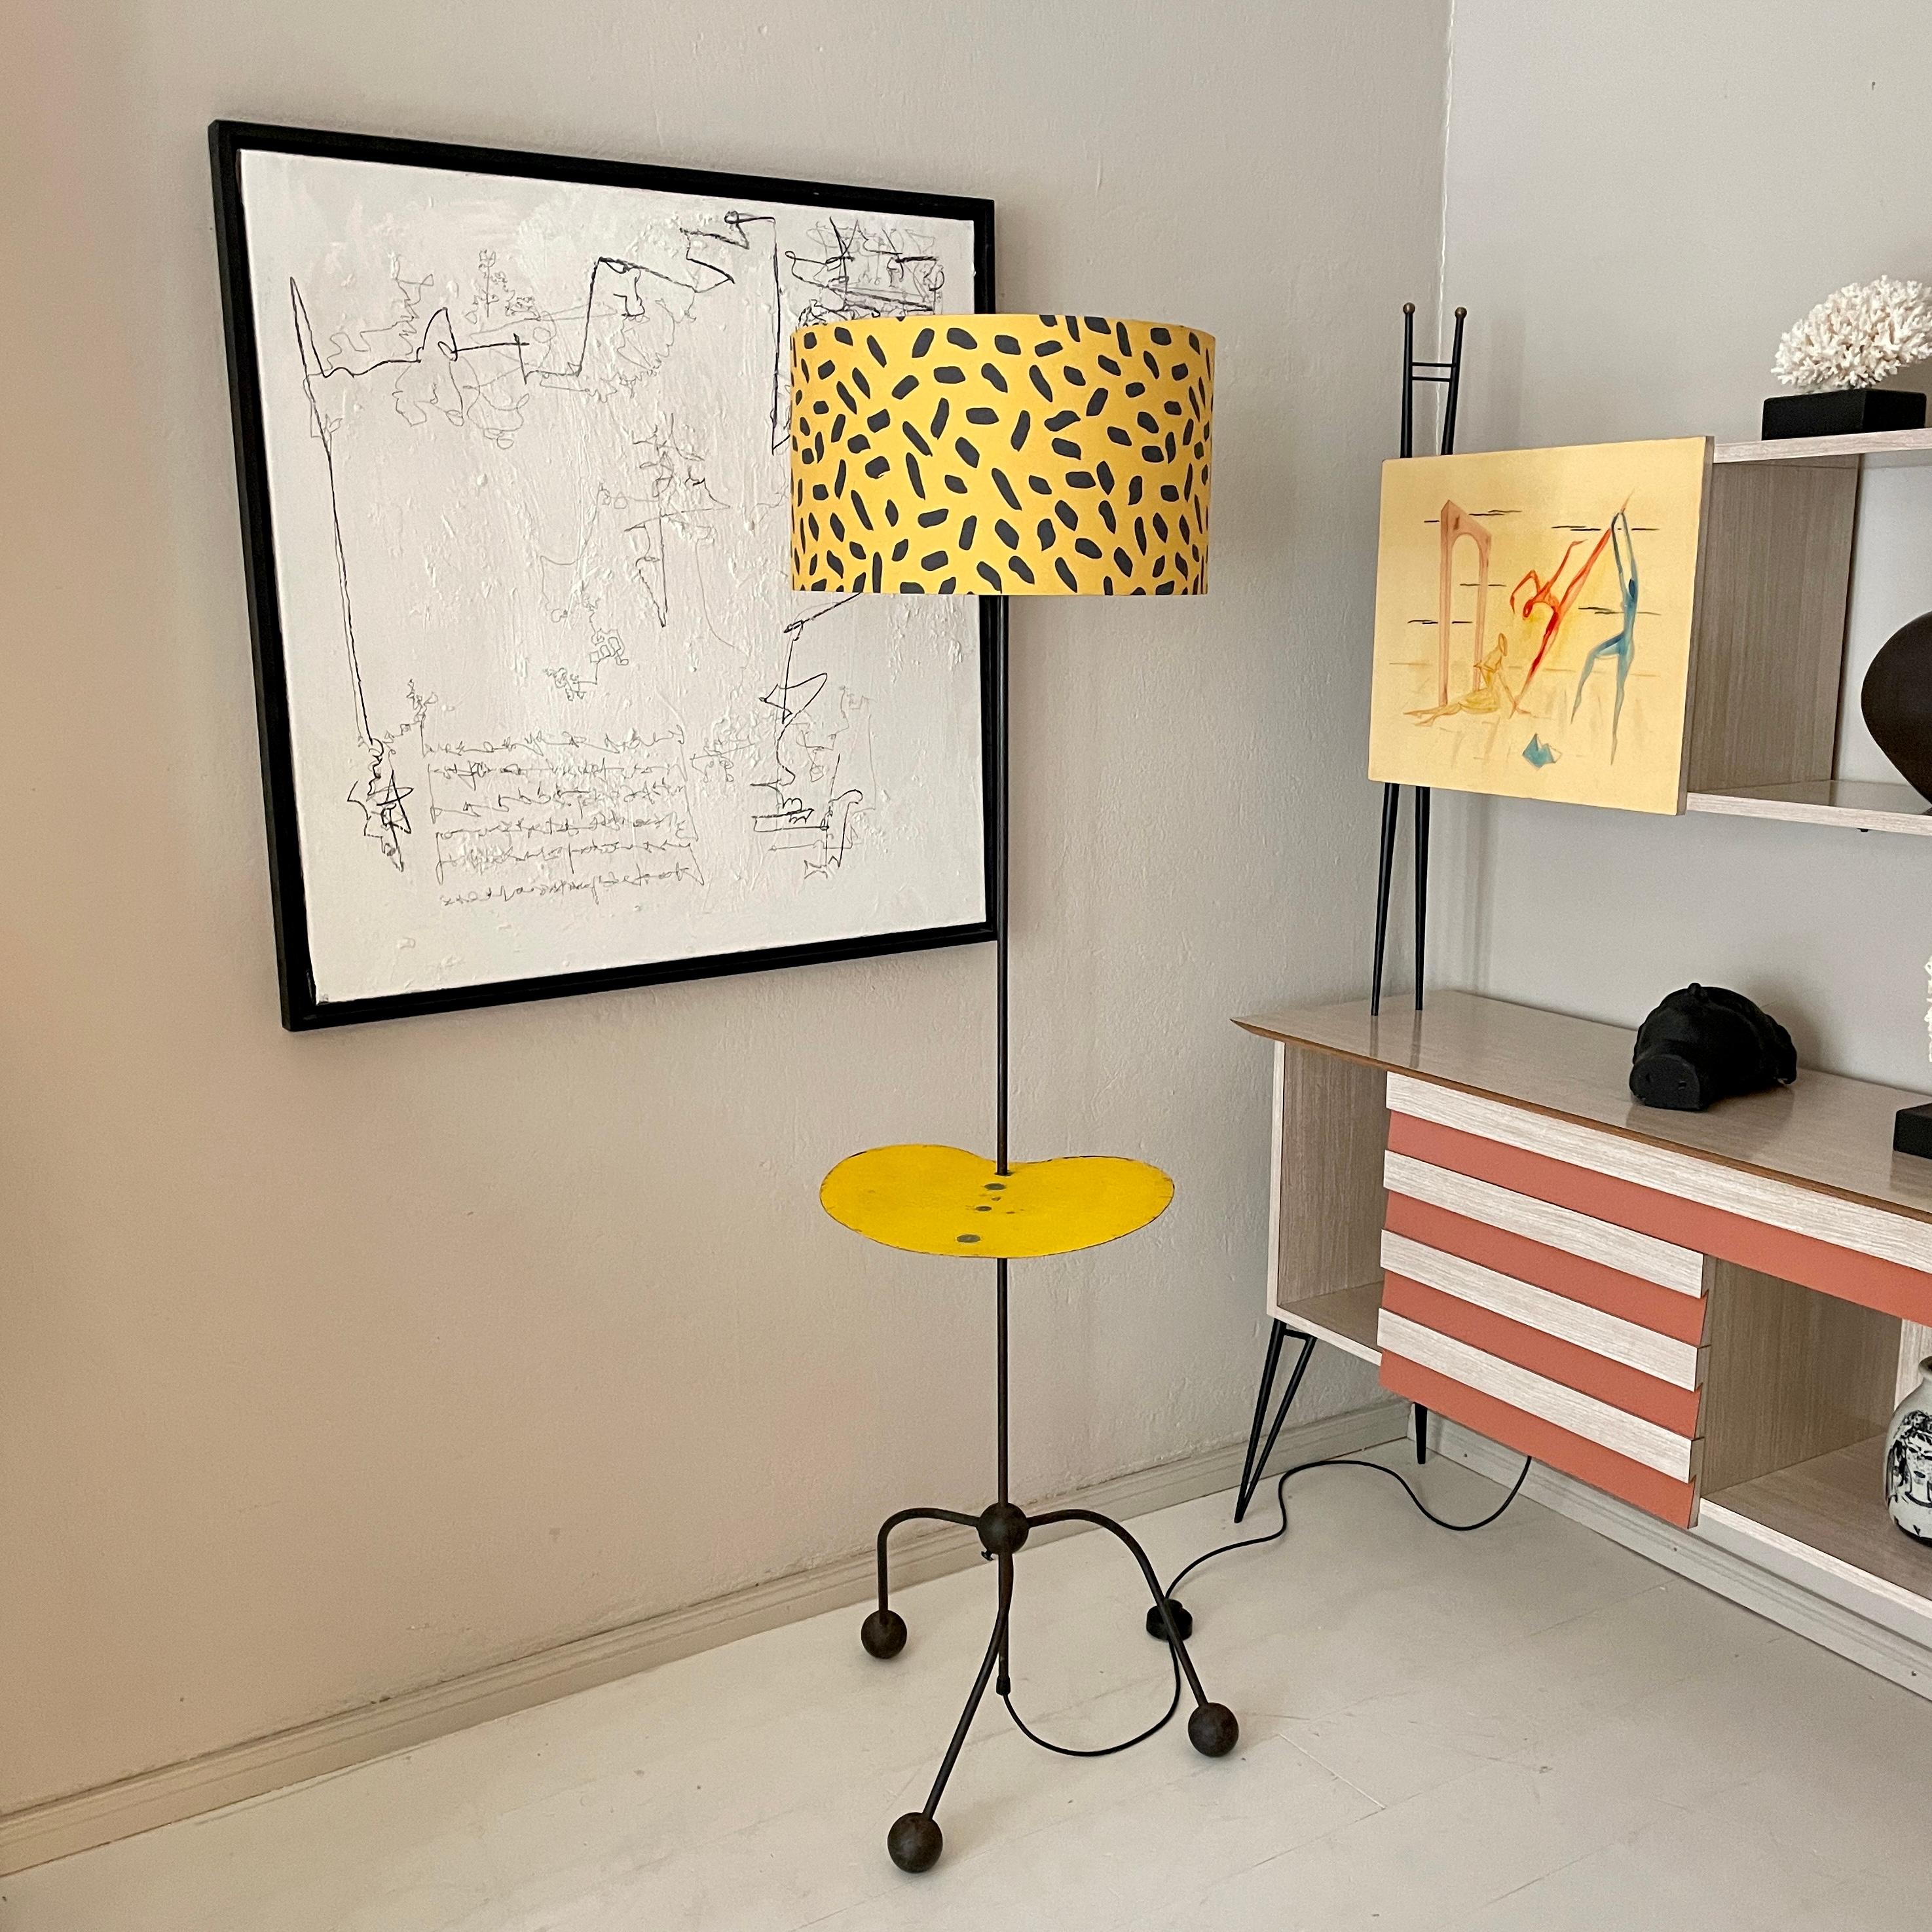 Lacquered Mid-Century French Floor Lamp Made of Black Metal with Yellow Fabric Shade, 1950 For Sale